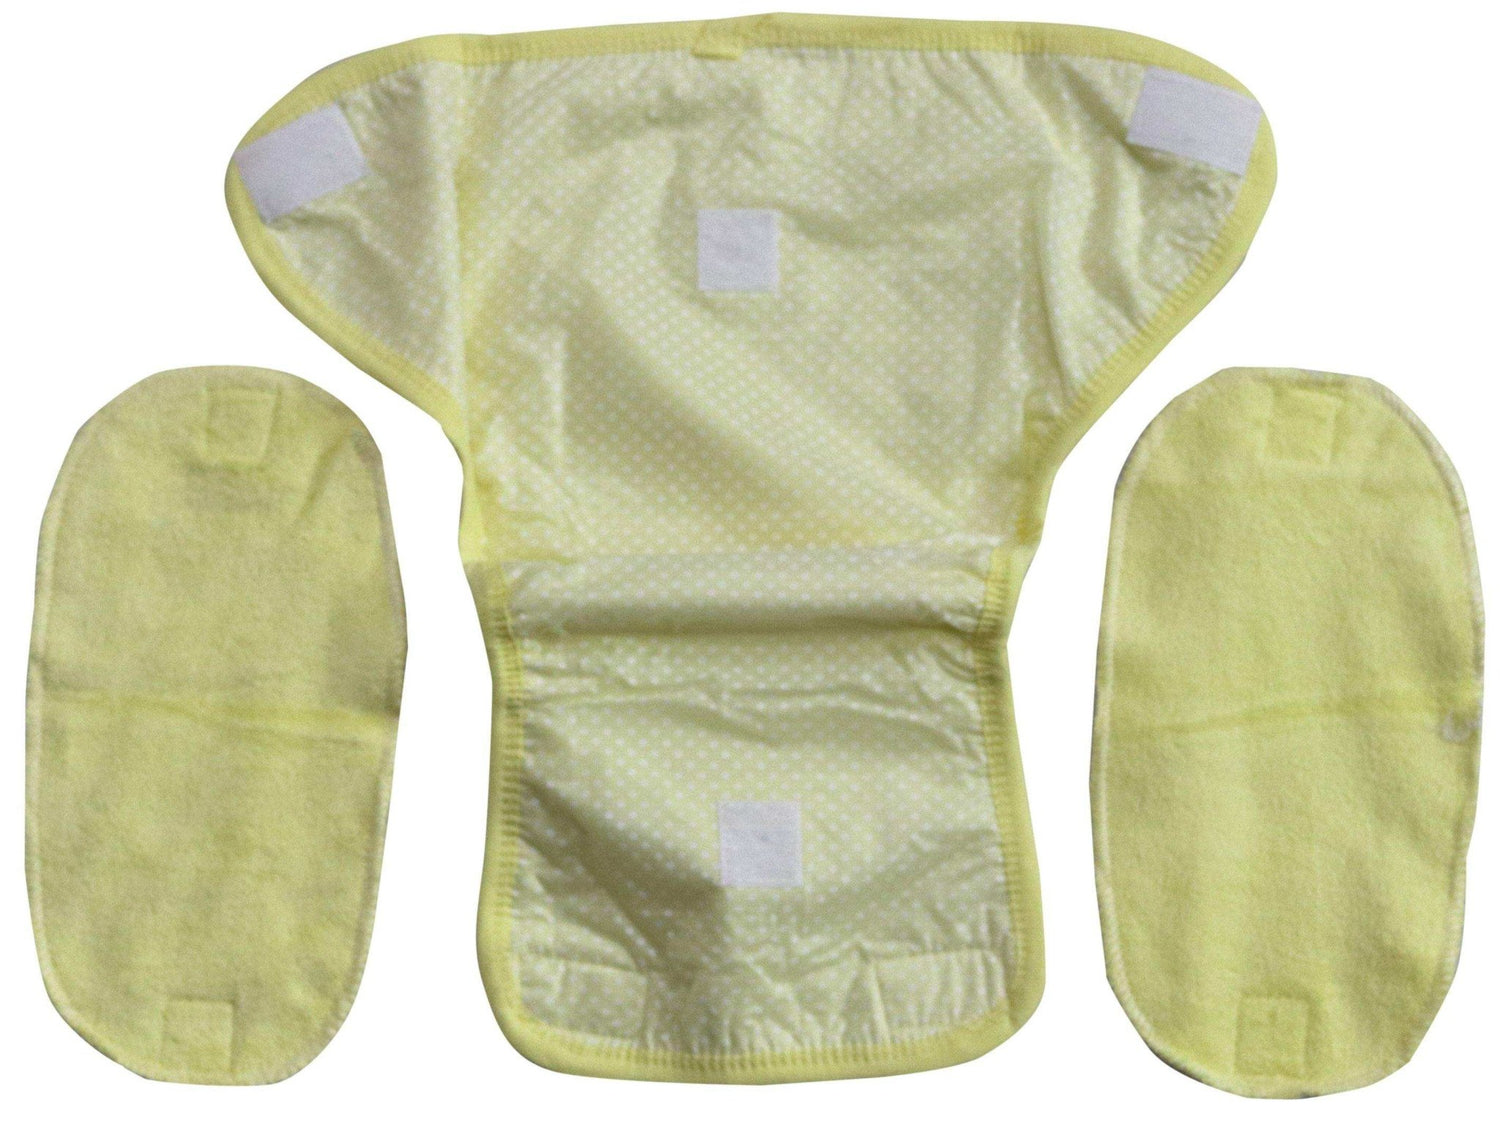 Newborn pure soft cotton reusable padded diapers or nappies - FAVISM